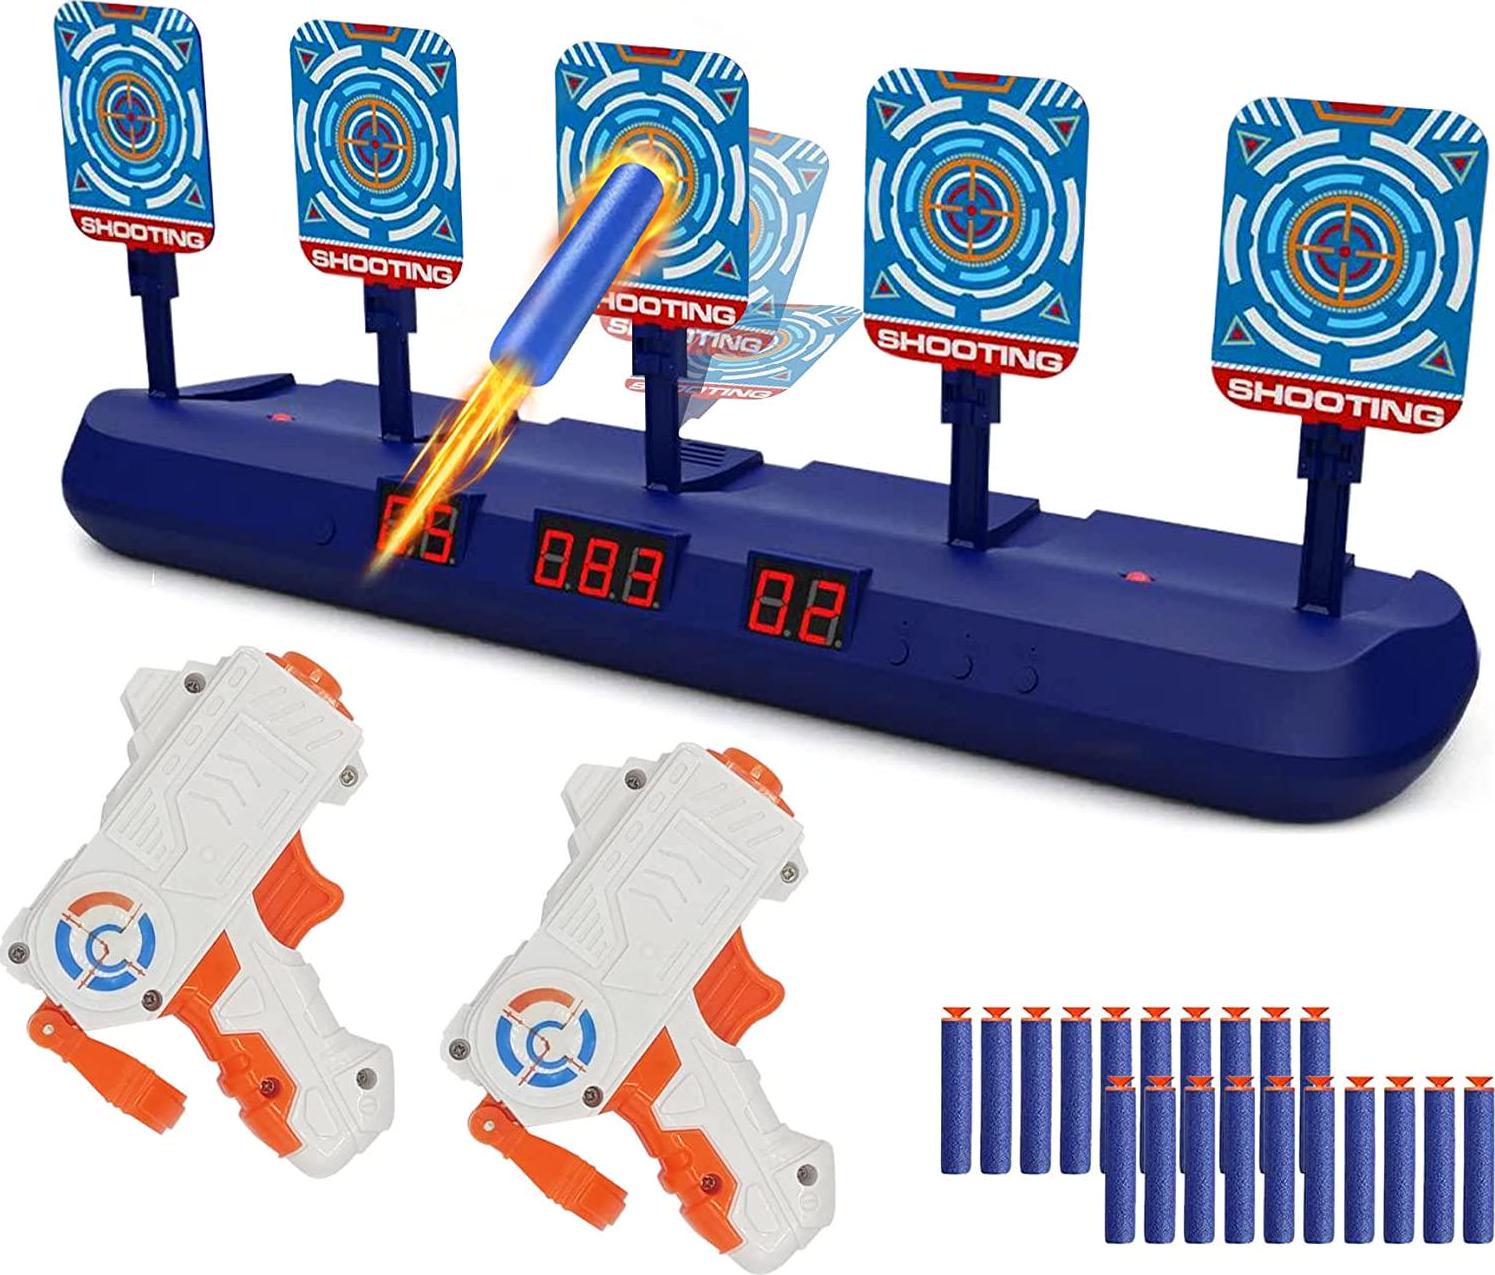 ZENLEA, Electronic Shooting Target with Foam Blaster and 2 Toy Guns, Electronic Scoring Auto Reset Digital Targets for Nerf Guns Toys Shooting Game Toy for Age of 5,6,7,8,9,10+ Years Old Kids Boys Girls